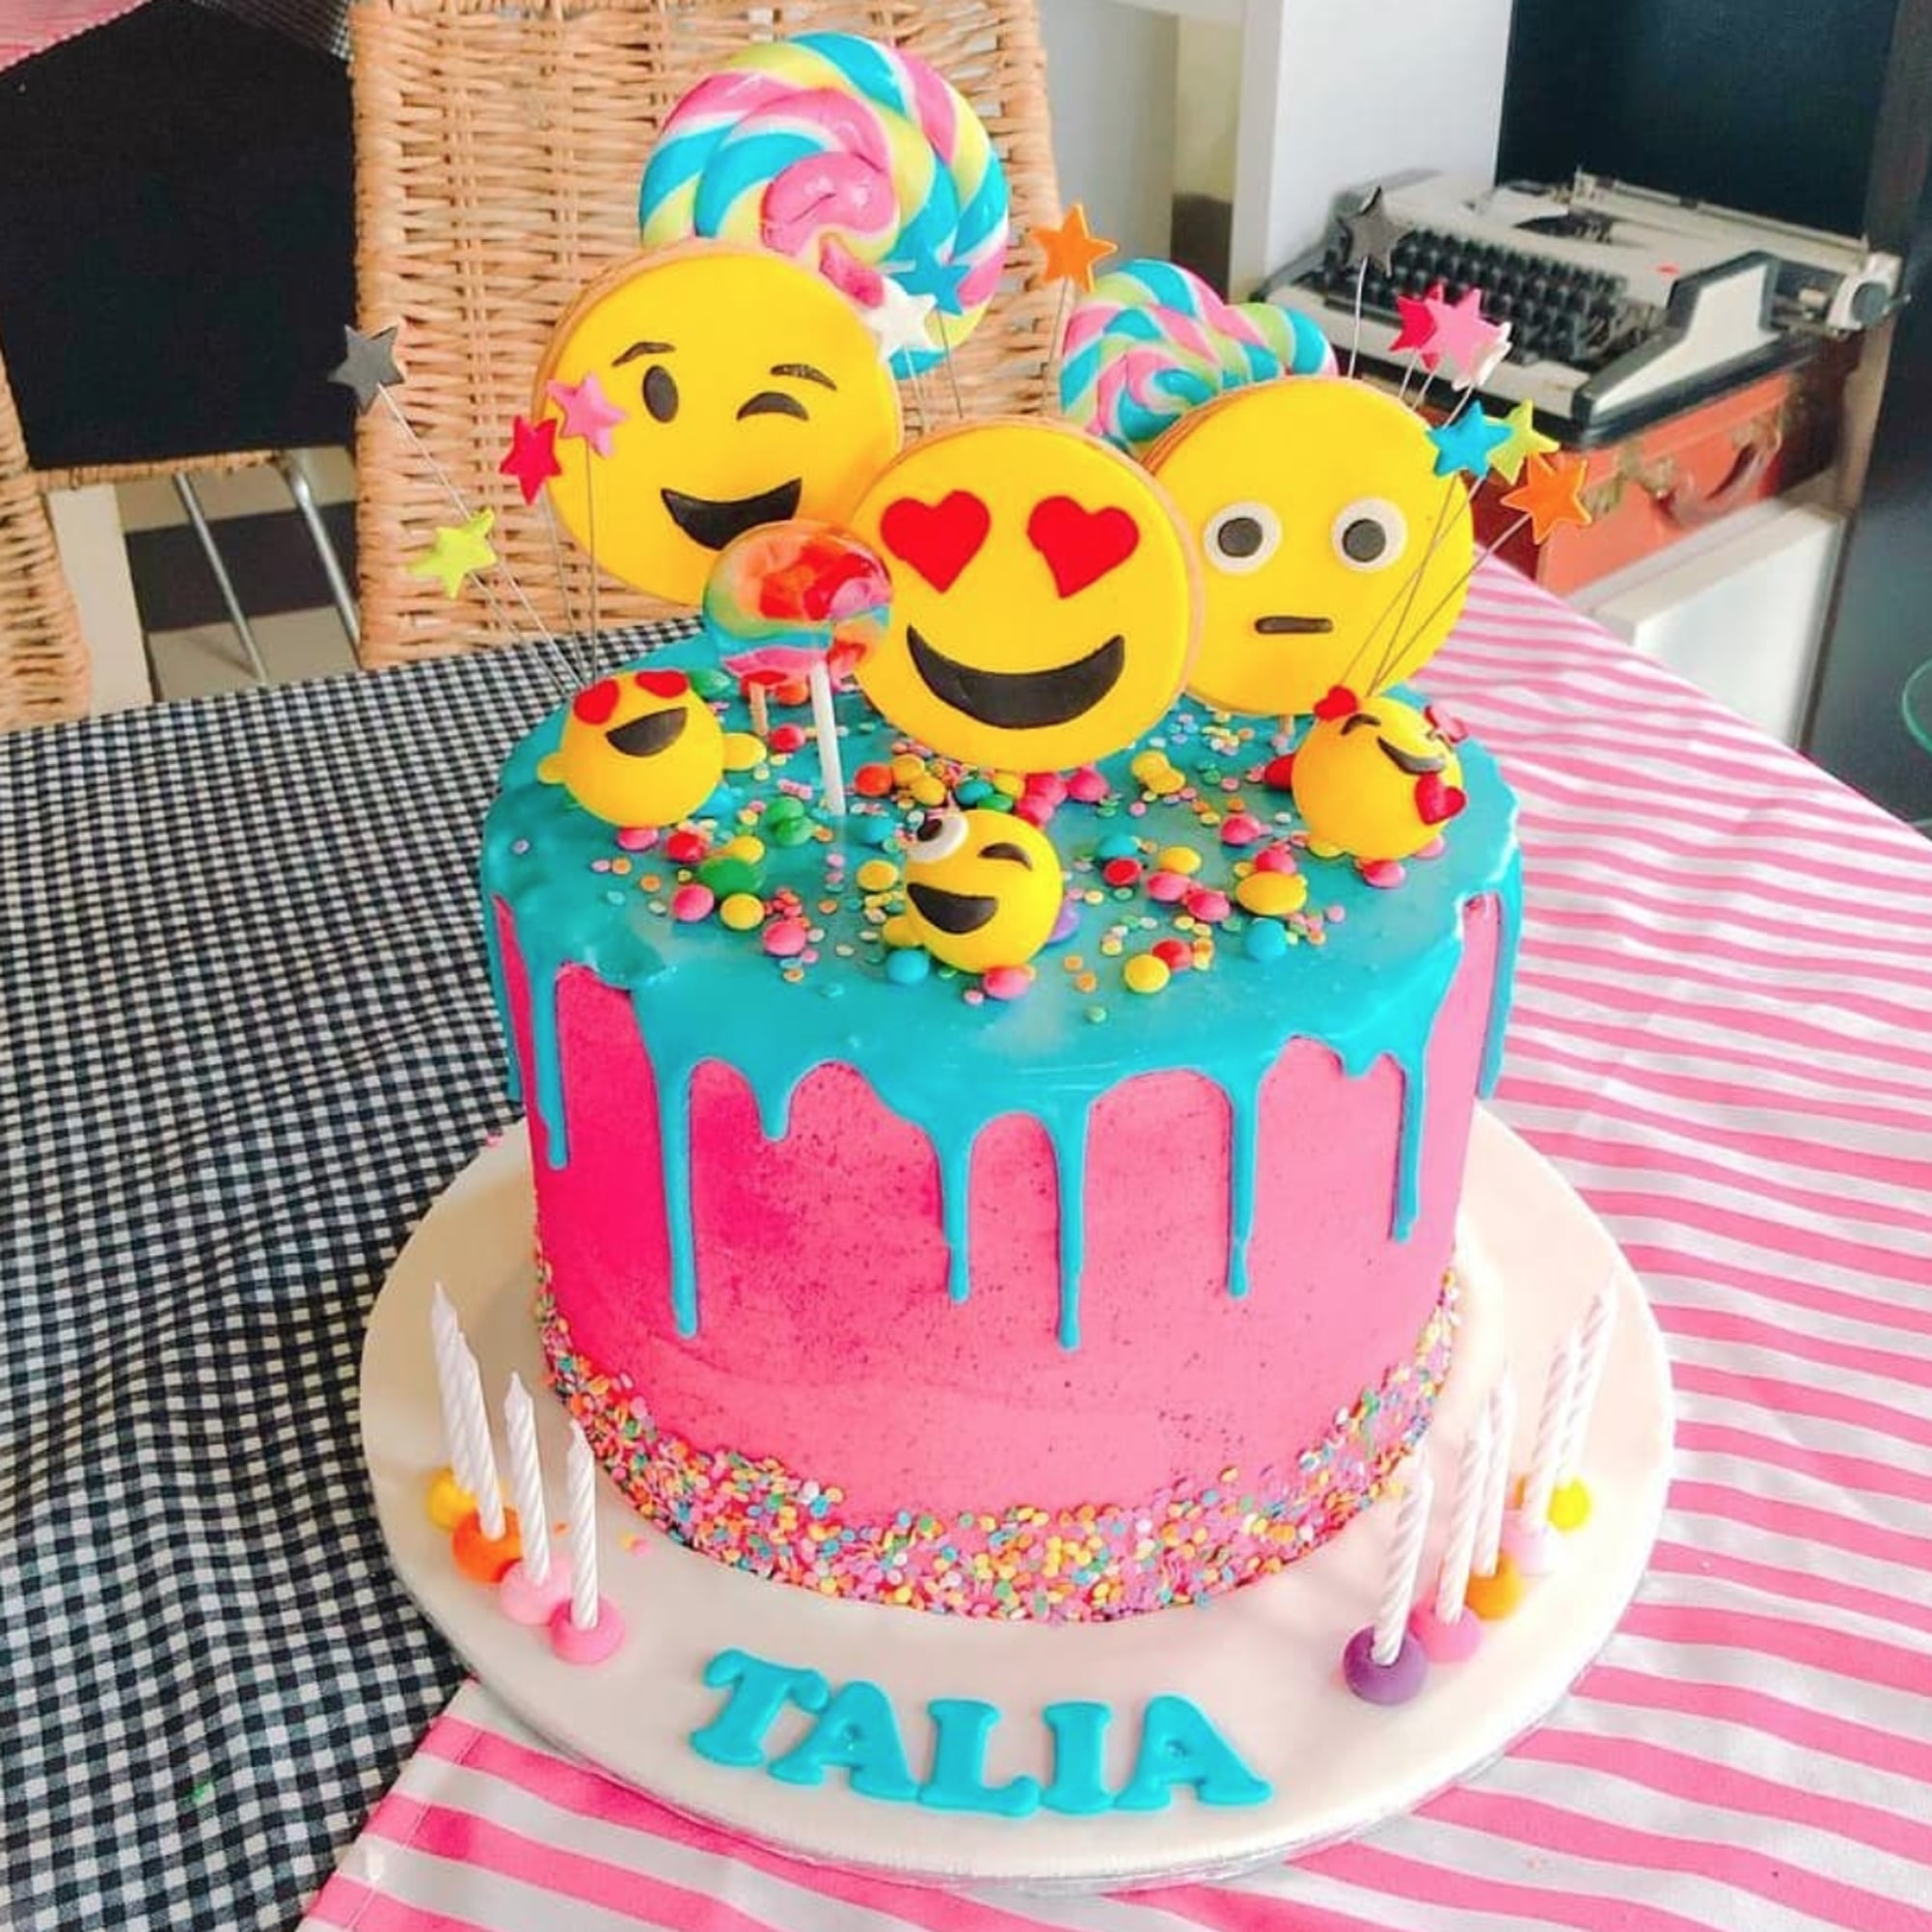 Discover more than 75 smiley emoji birthday cake best - awesomeenglish ...